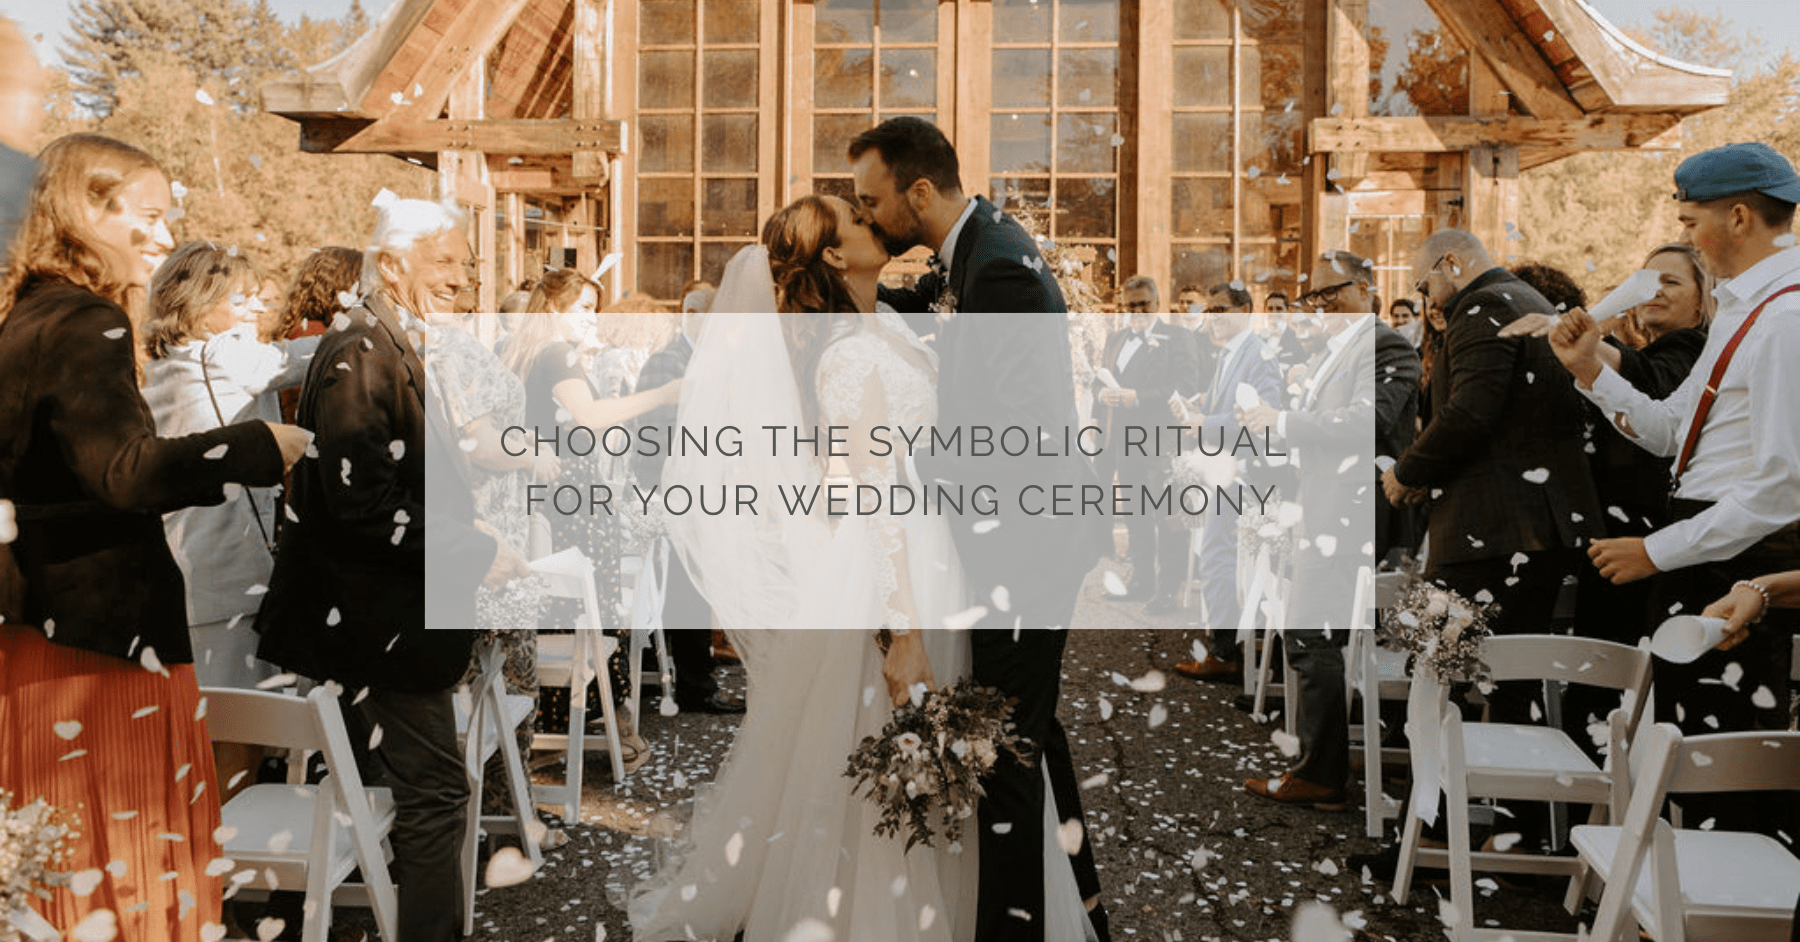 Choosing the symbolic ritual for your Quebec wedding ceremony